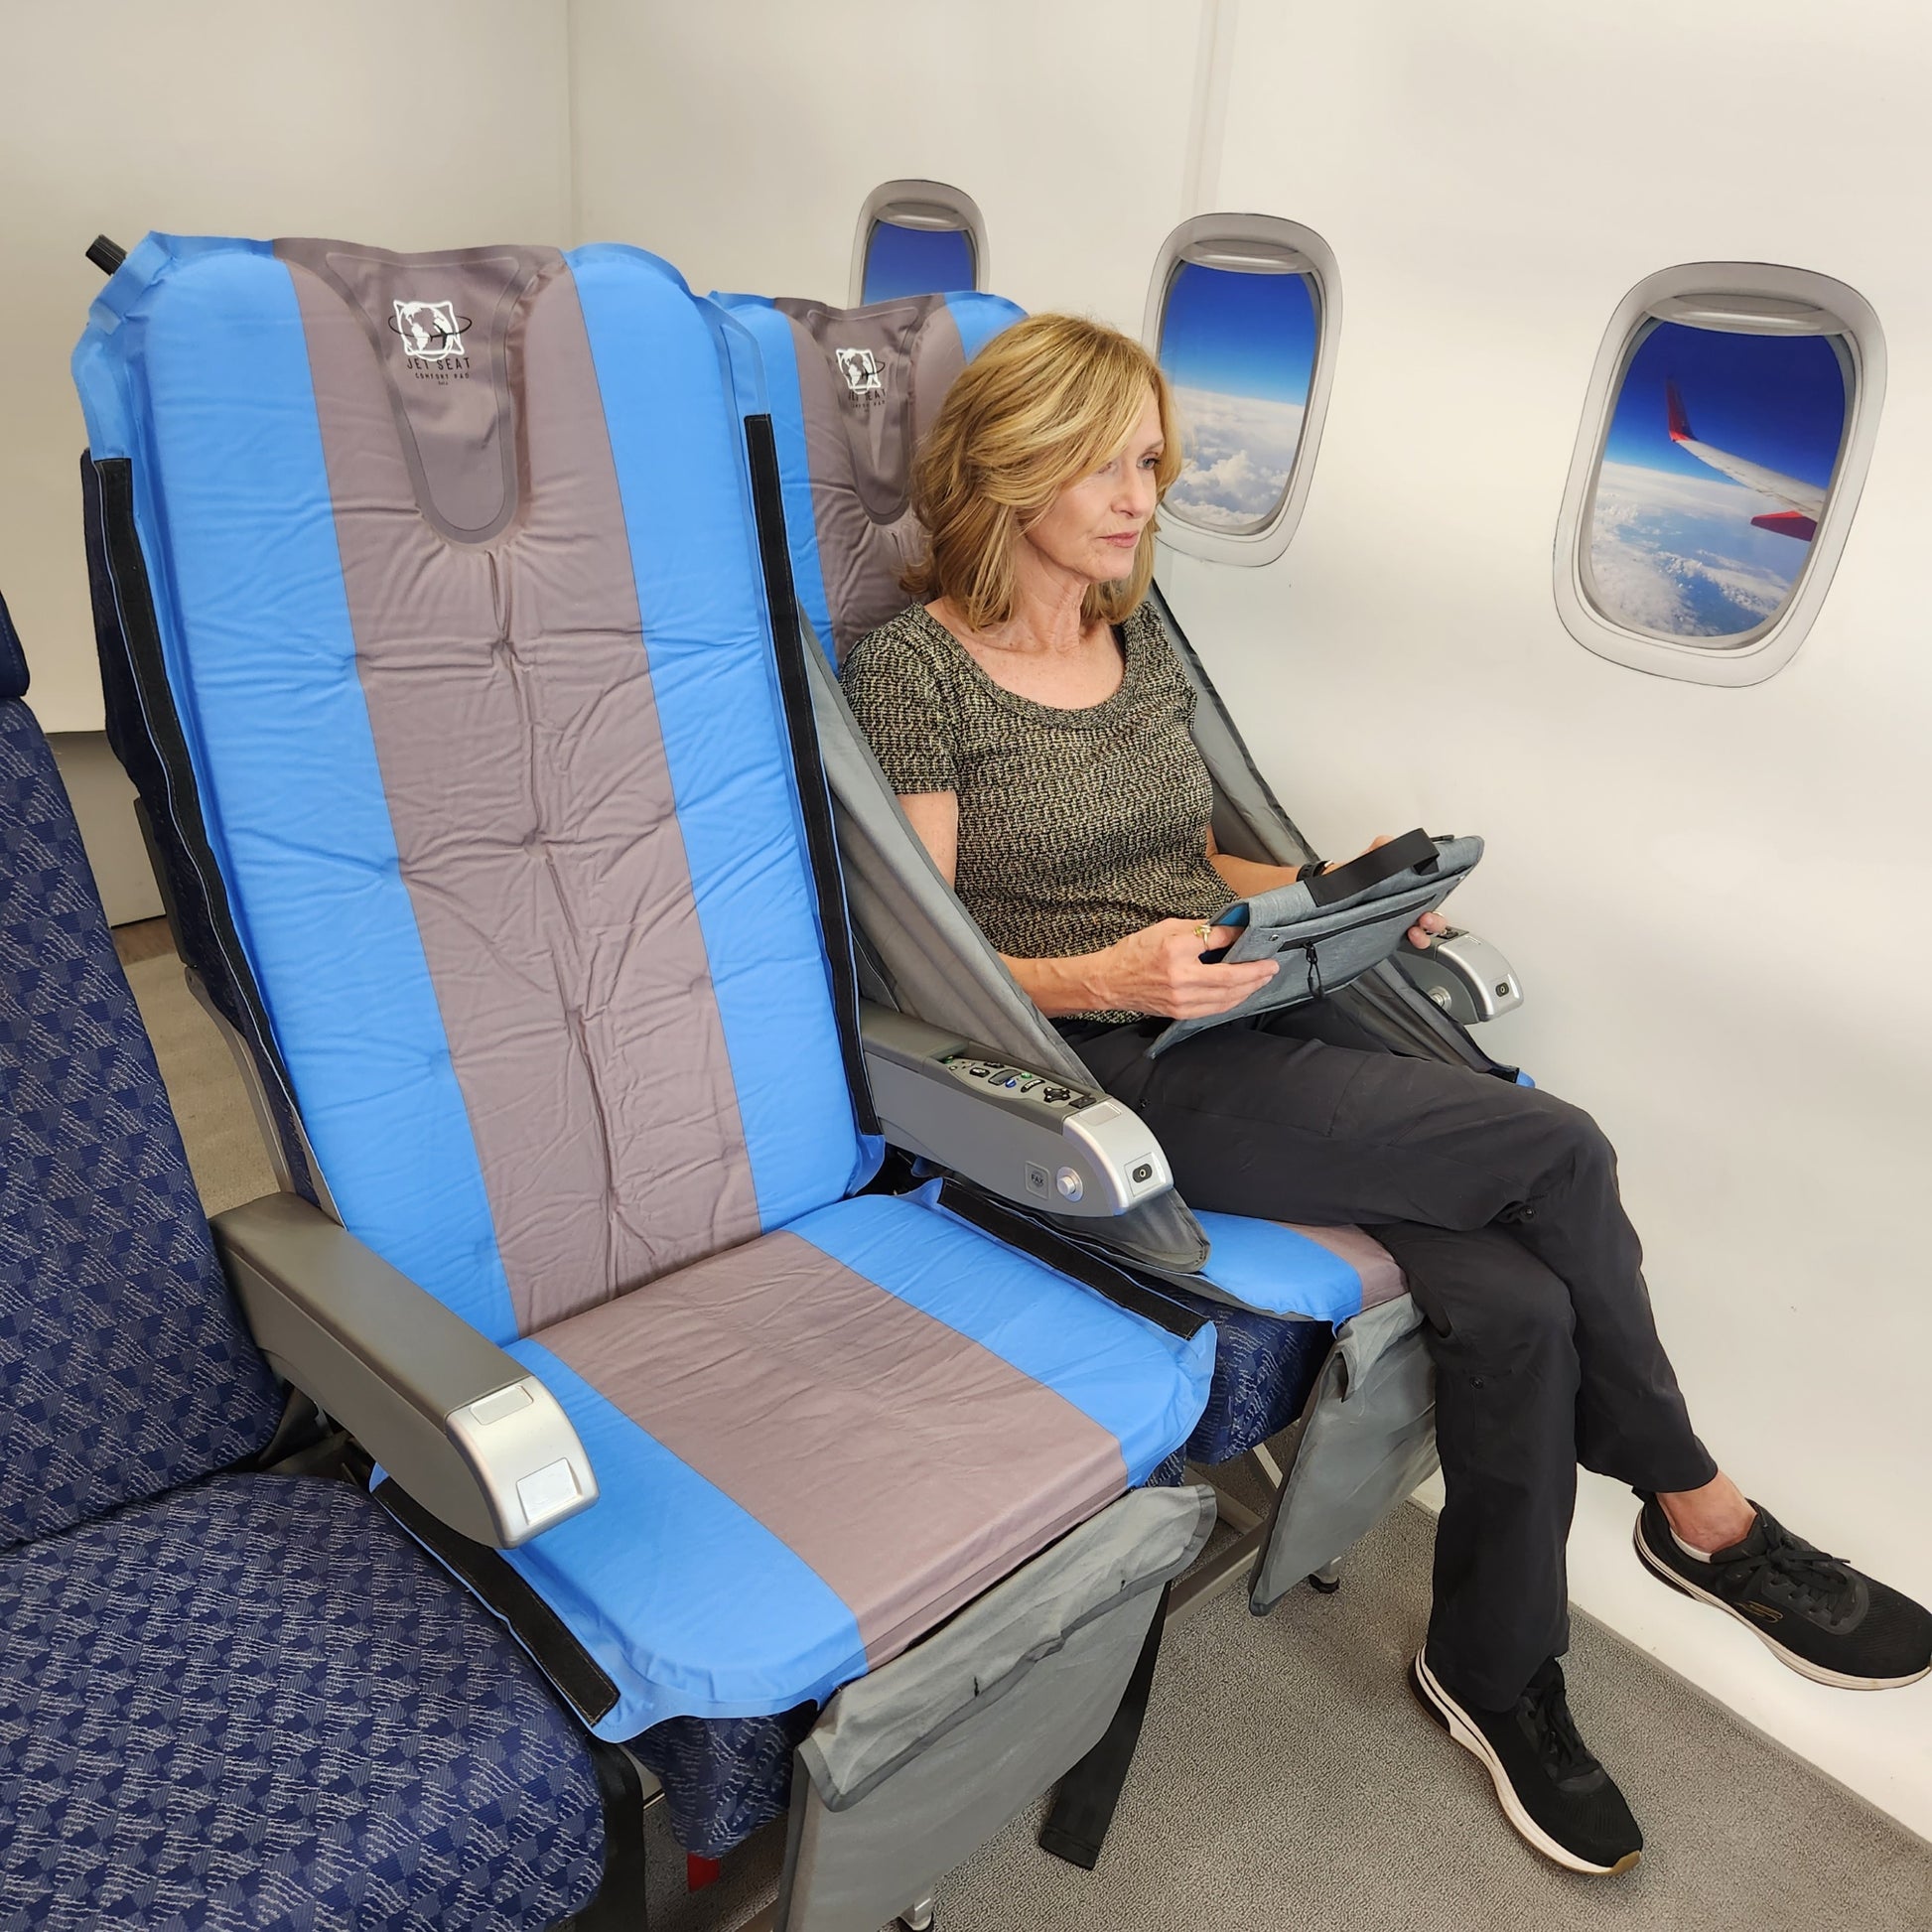 Woman sitting in Jet Seat enjoying comfort and relief from back pain on airplane during travel